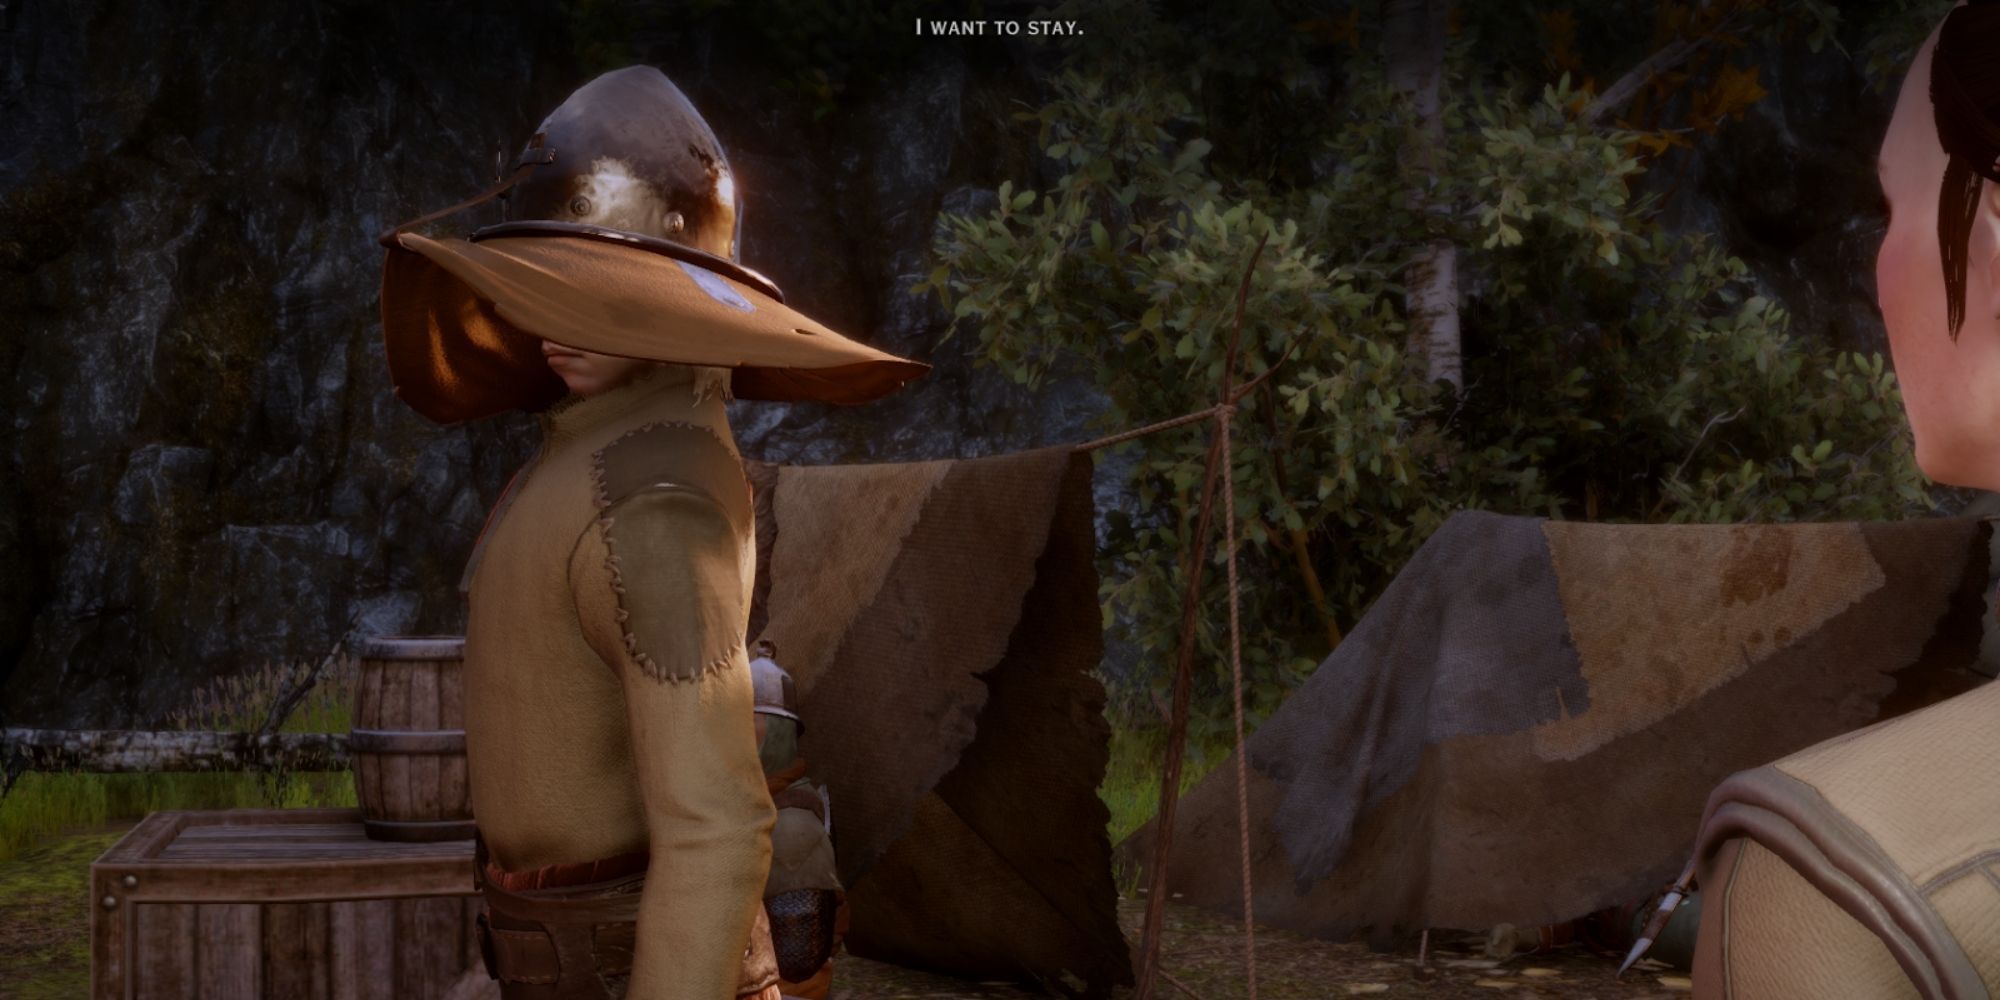 Dragon Age Inquisition - Cole saying he wants to stay